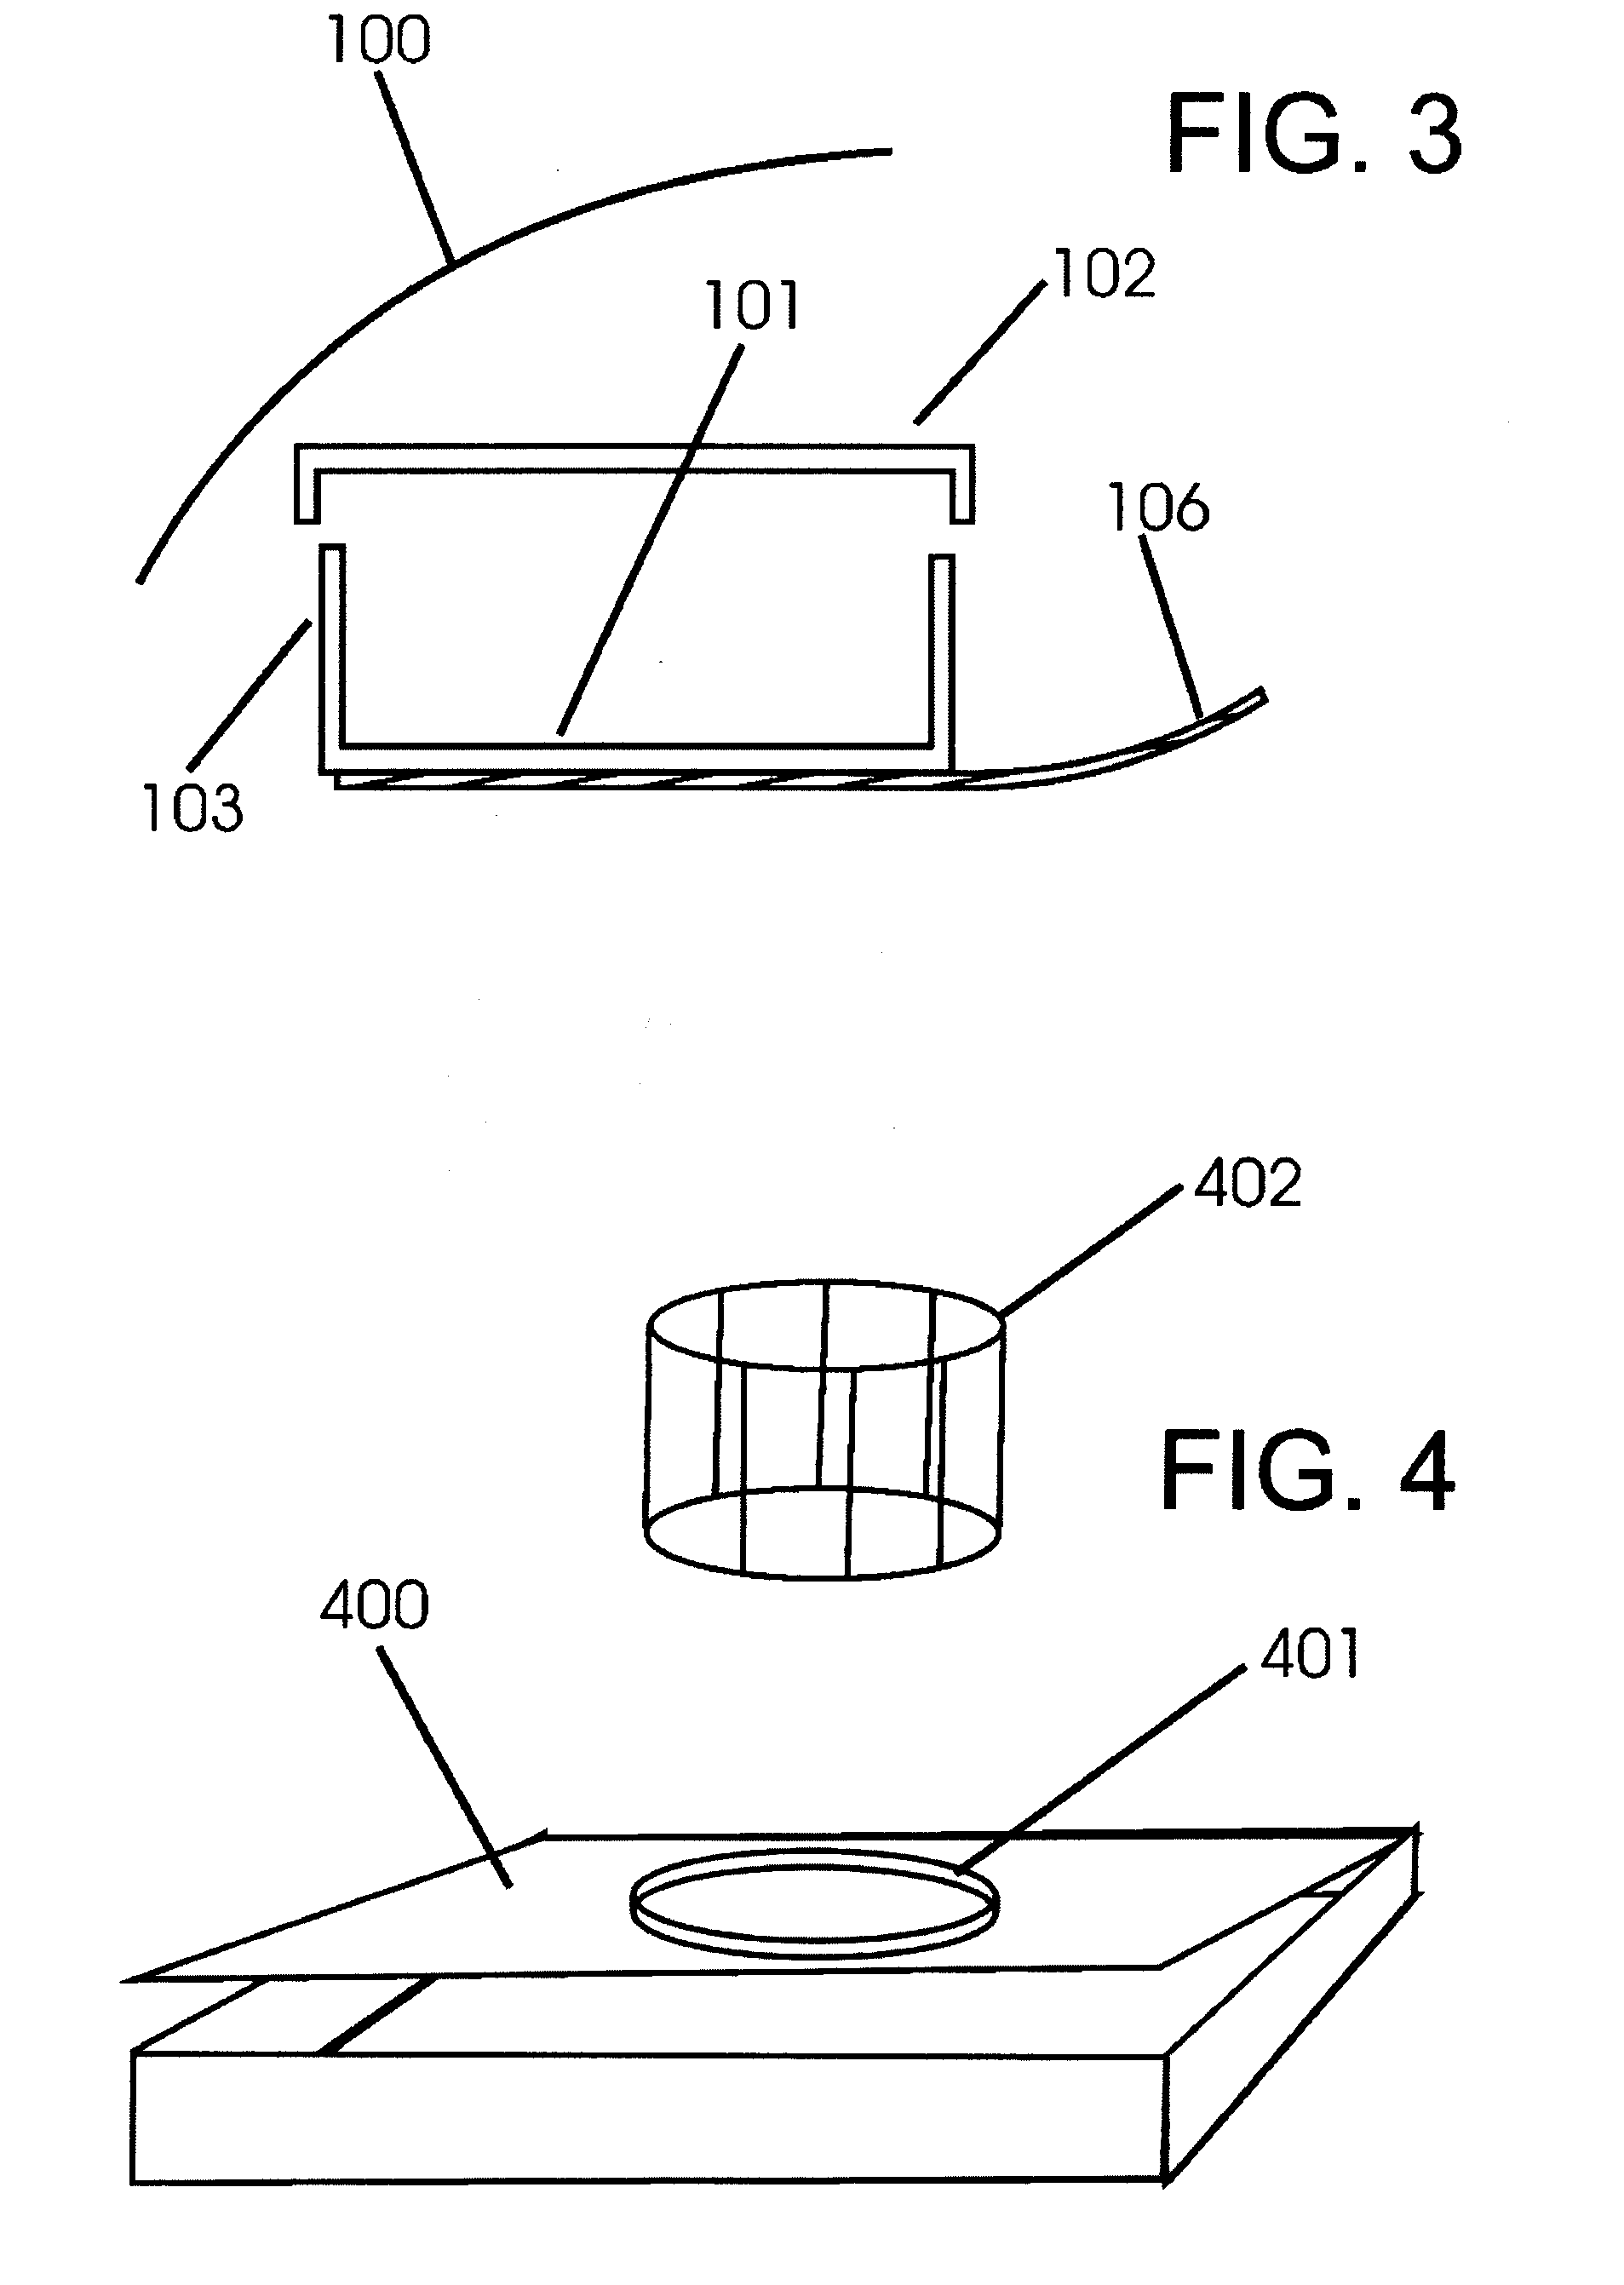 Apparatus and Method to Monitor Particulates